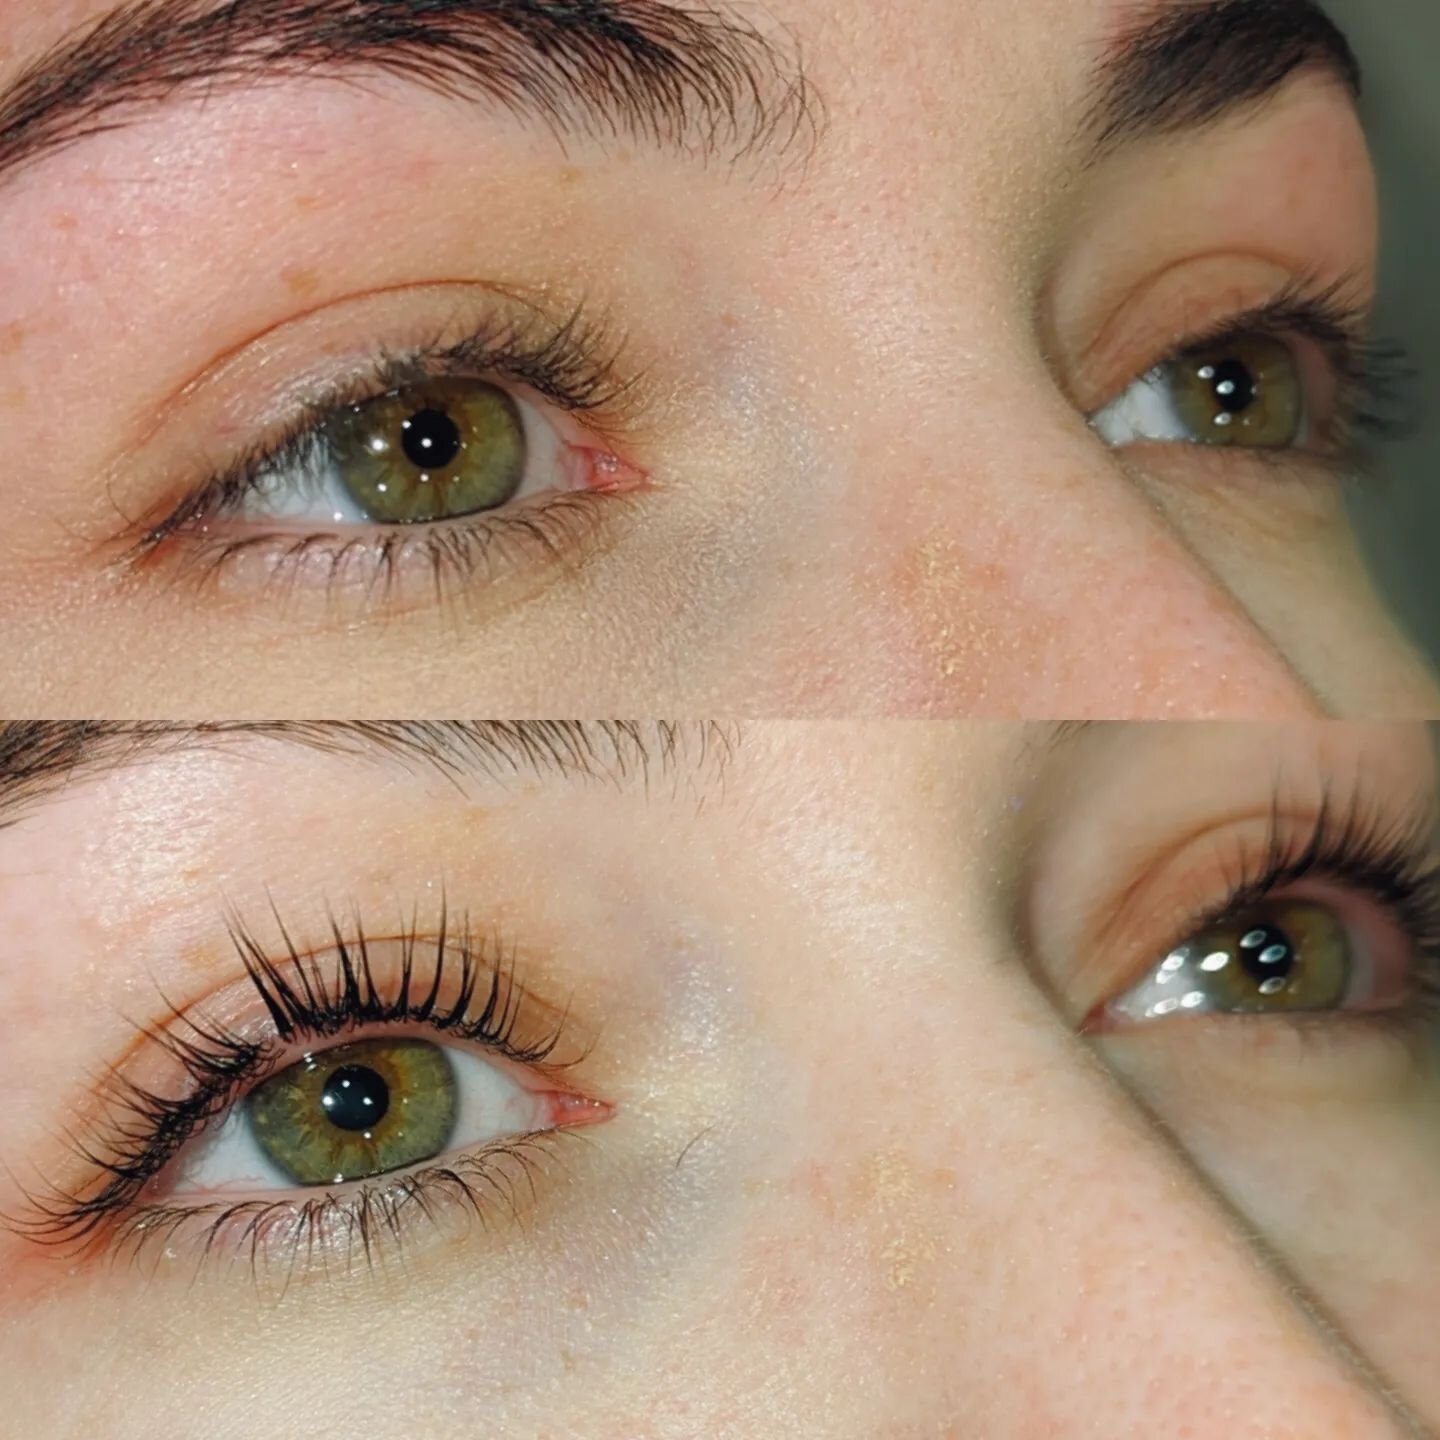 LVL &amp; Tint ☀️ Lifting Your Natural Lashes From The Root Giving Them Length &amp; Volume Then Defining Them With Tint For Stand Out Lashes.

Treatment By Erin.

#lvlandtint #lvl #lvlresults #lvllashlift #lvlwithhive #beautybyhive #beautysalon #bea